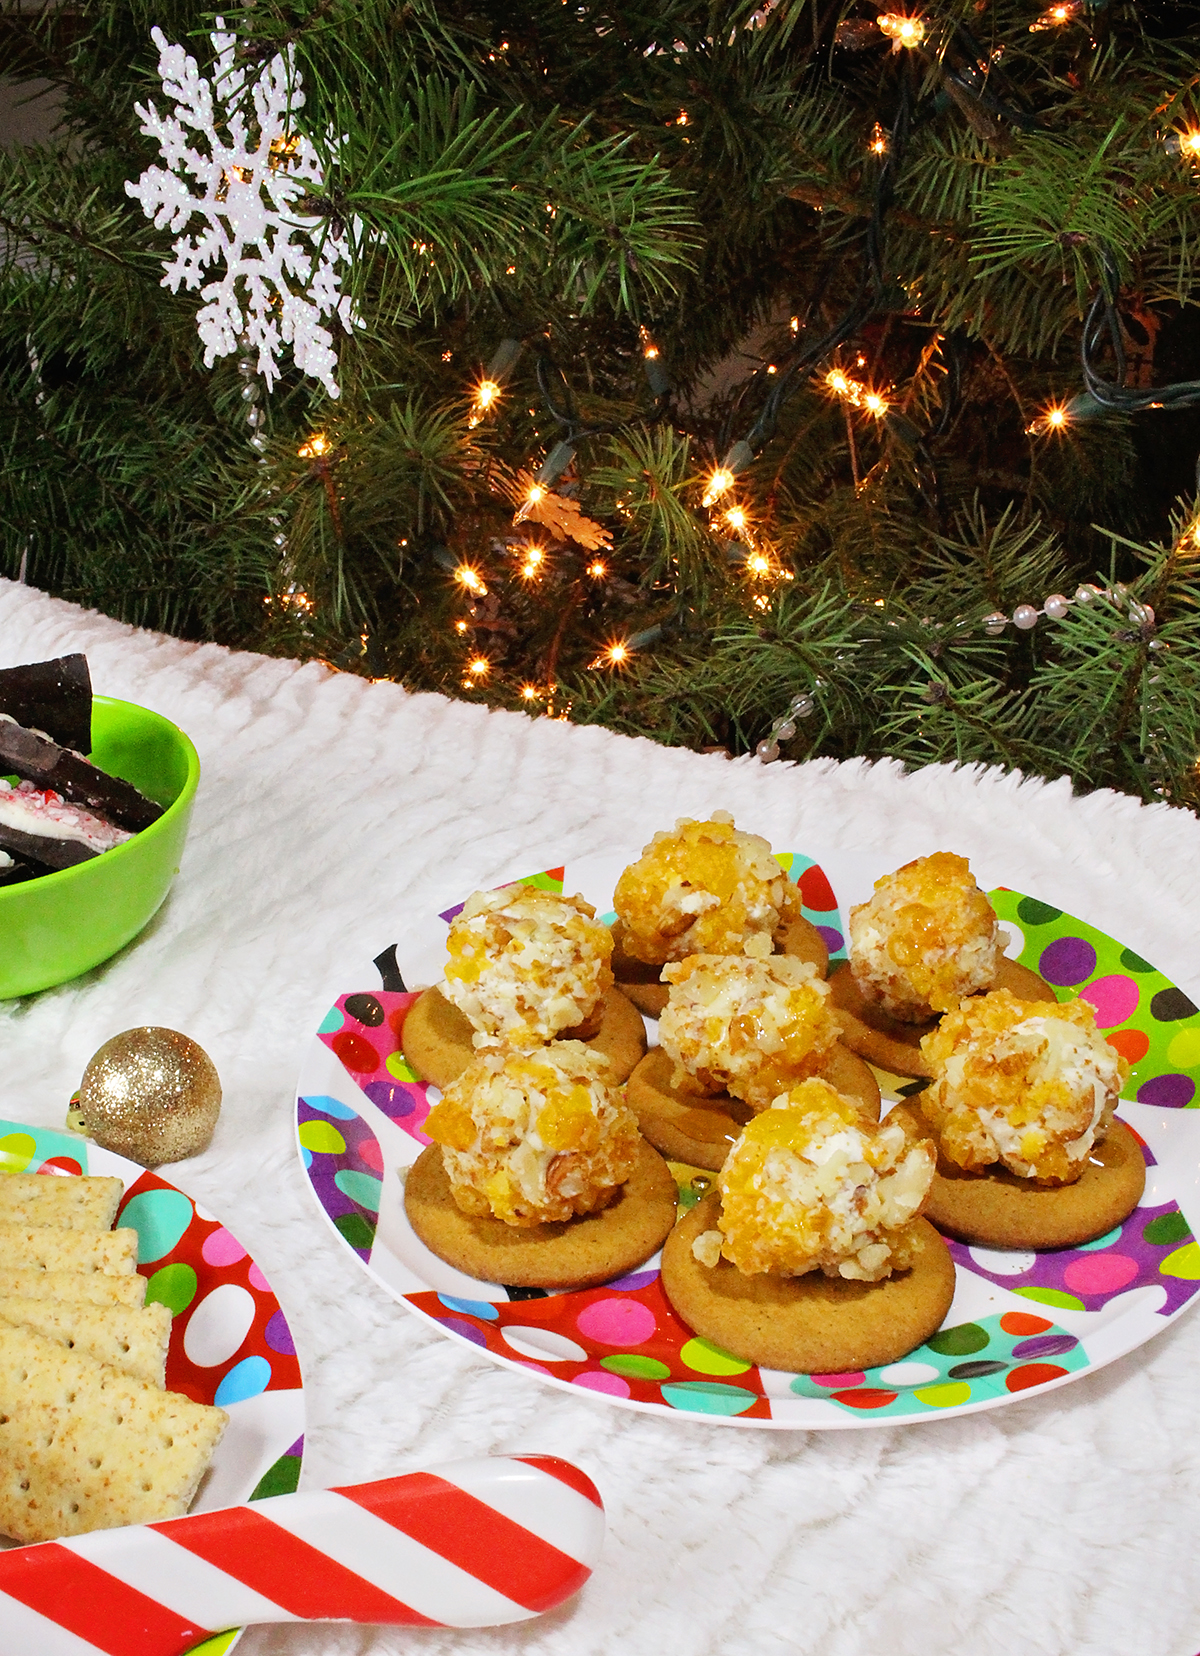 Easy Holiday Appetizer: Goat Cheese, Honey, Apricot, & Almond Balls on Gingersnap Cookies - A Well Crafted Party